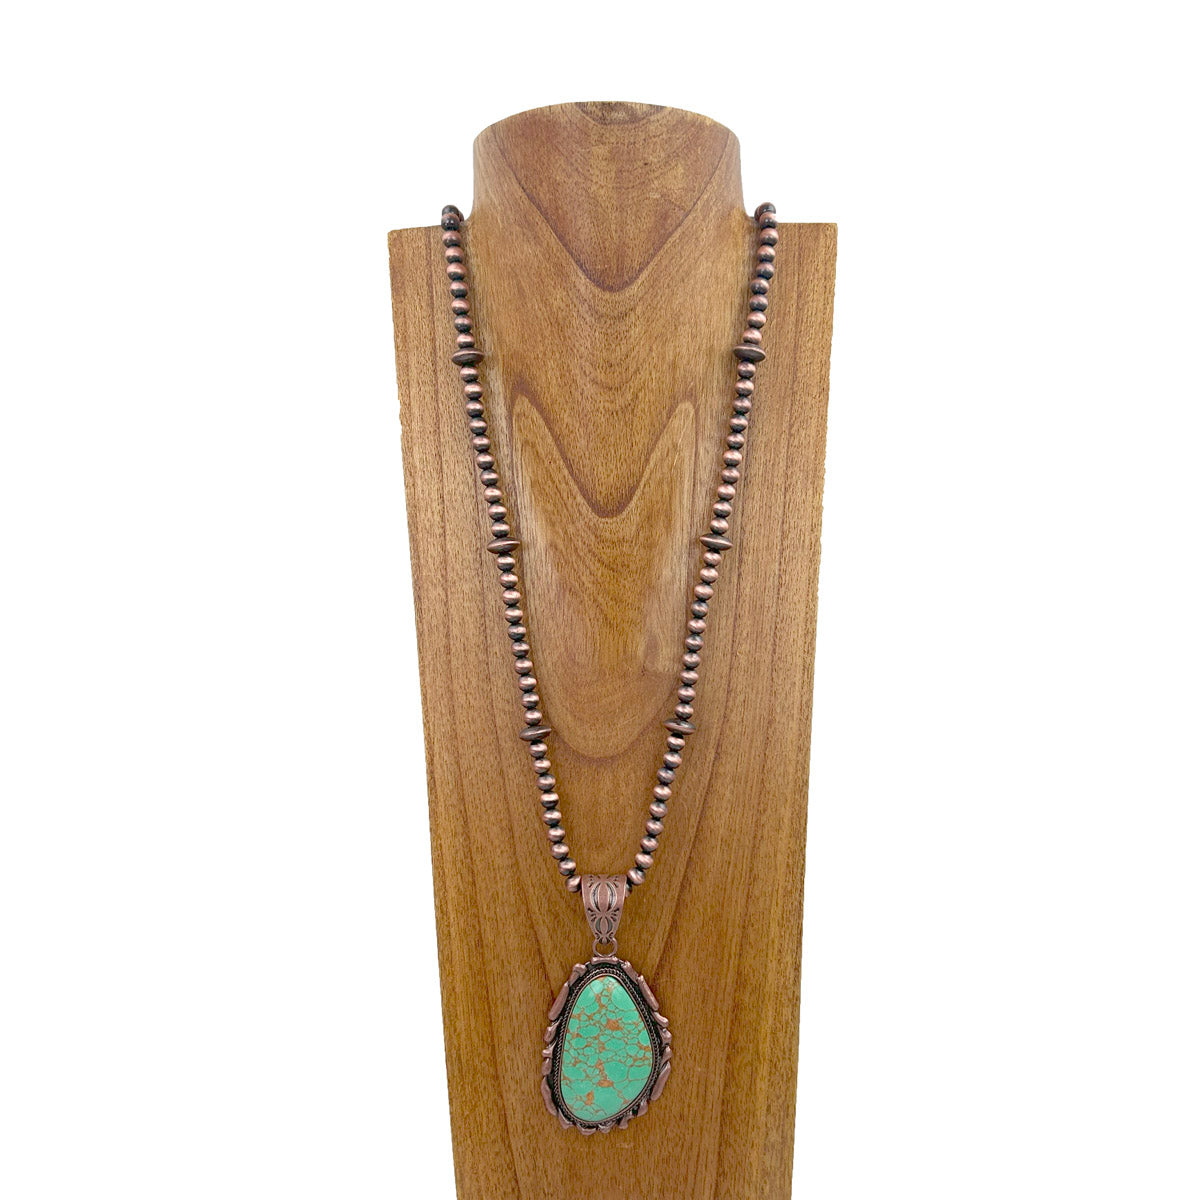 NKZ231124-59                  36 inches copper Navajo pearl beads strings with blue turquoise teardrop stone pendent Necklace